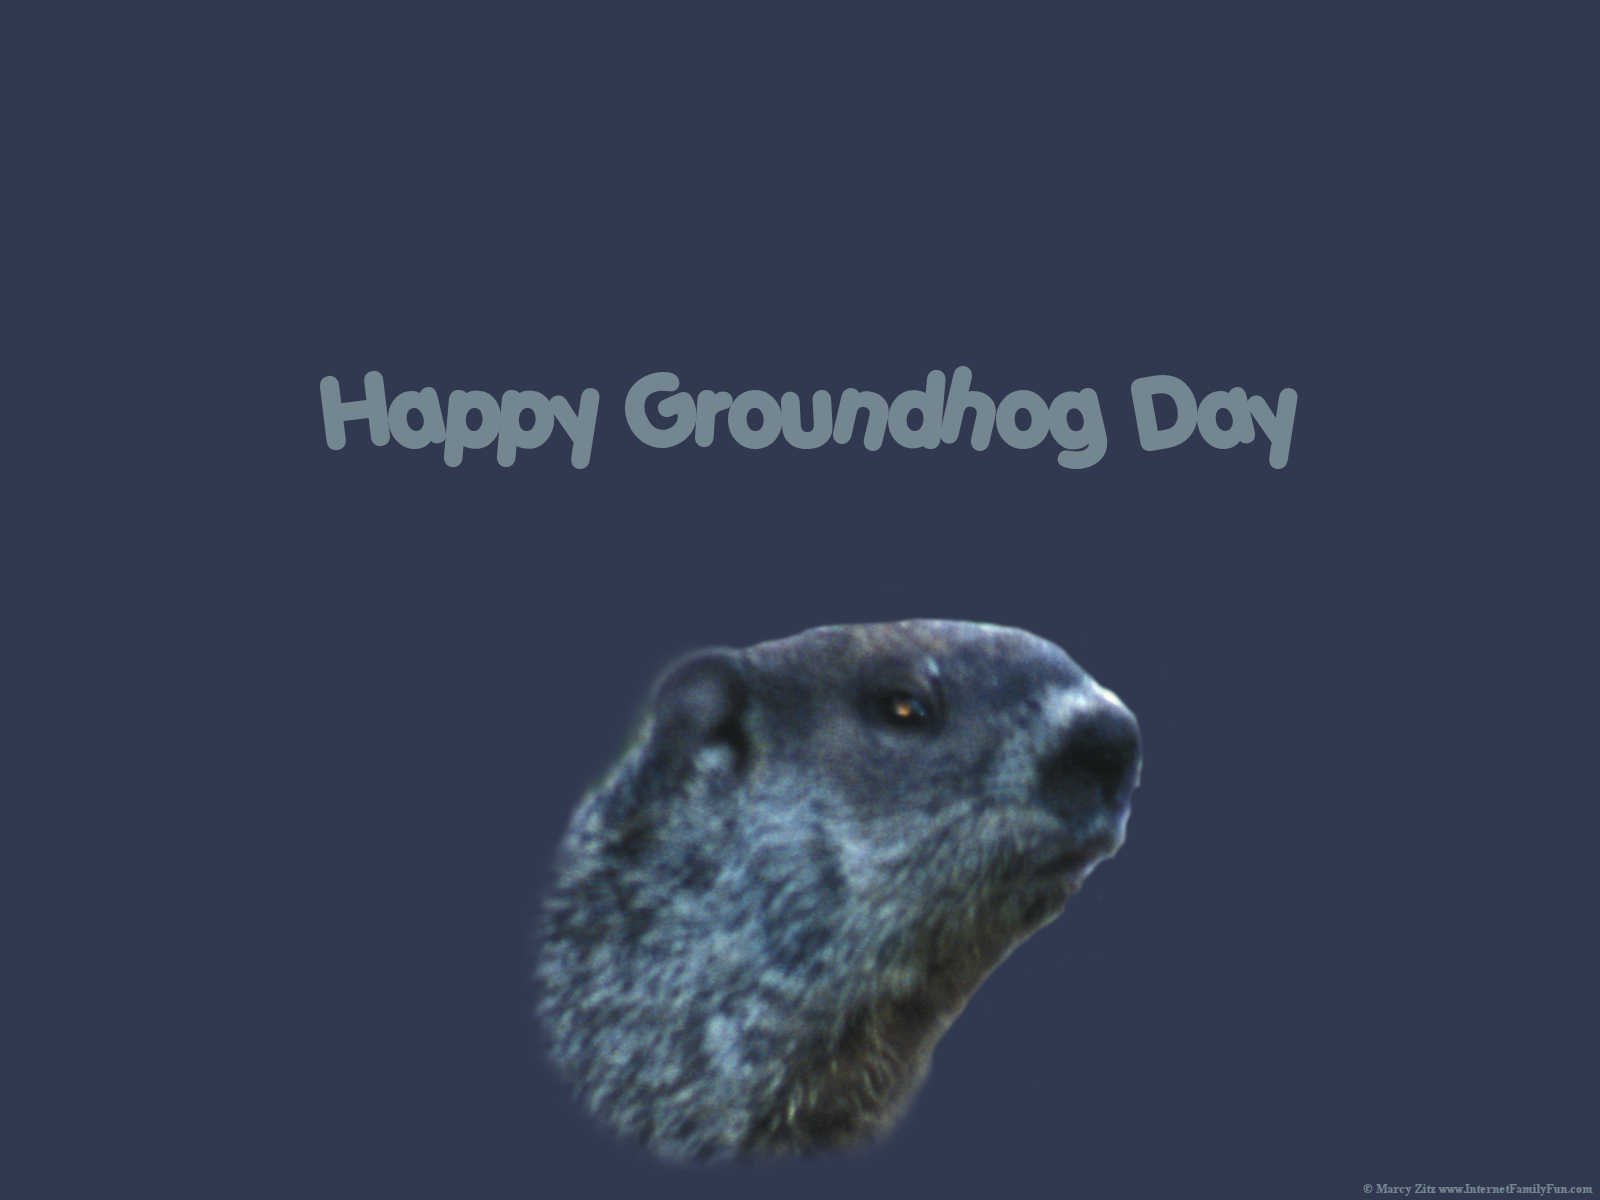 Groundhog Day Wallpaper Background for Desktop with Happy Groundhogs